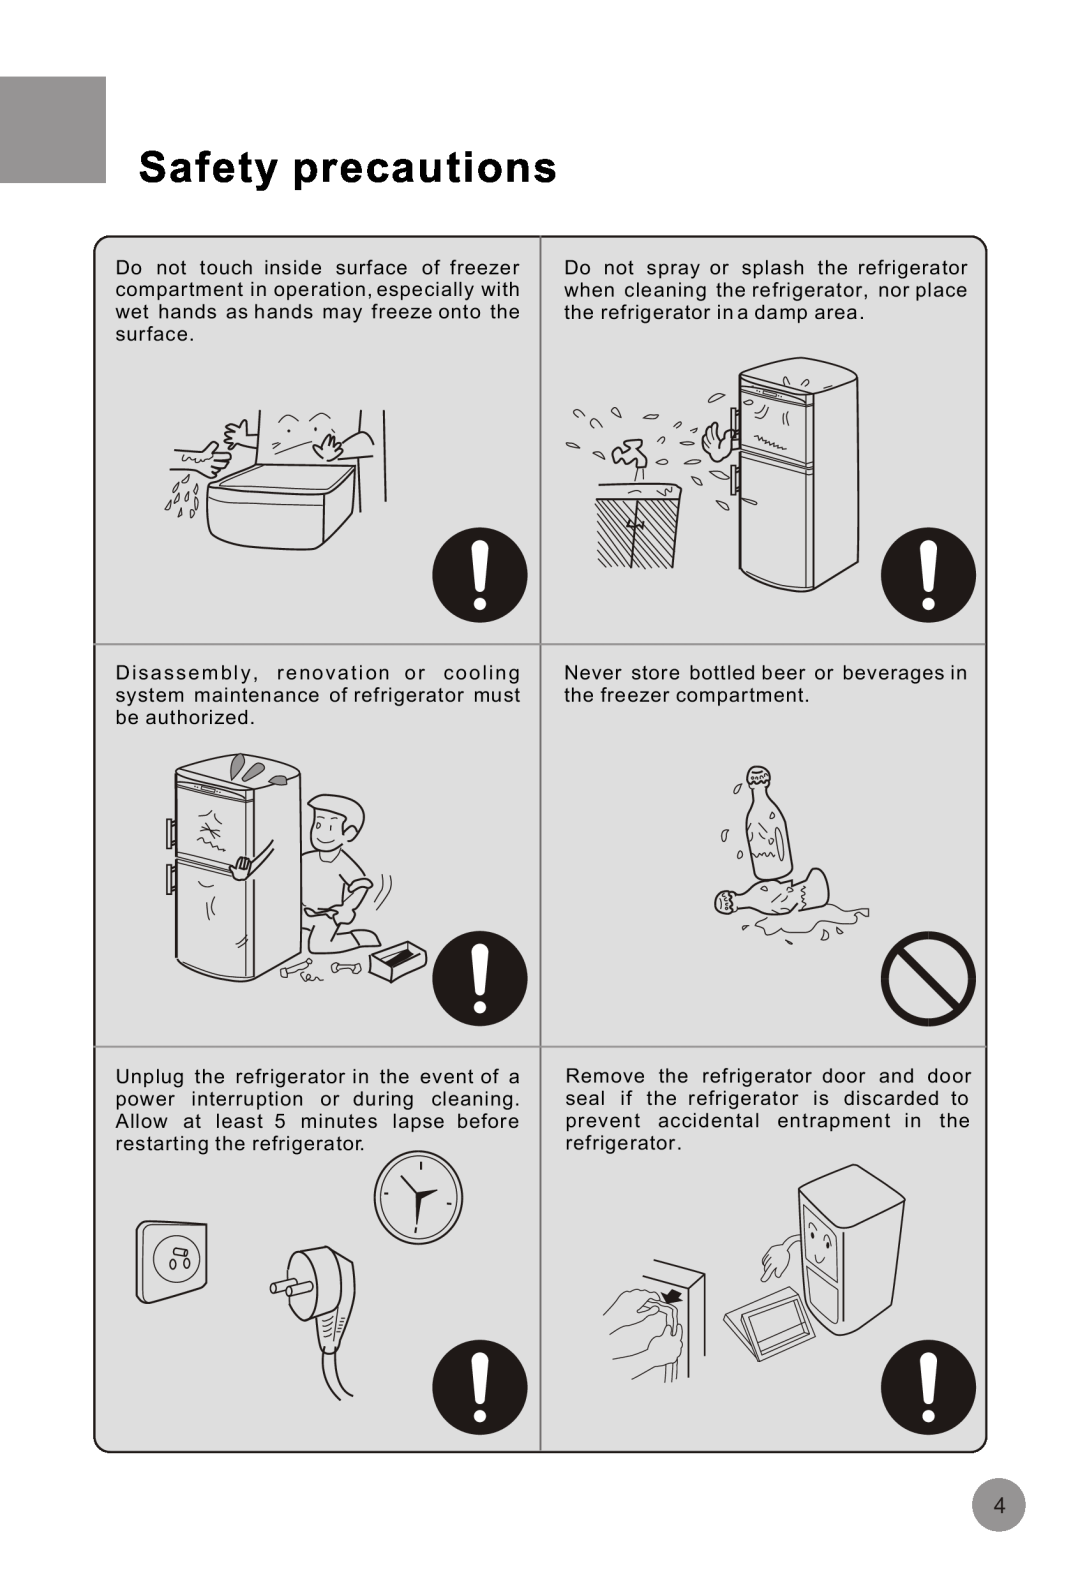 Haier HRF-516FKA operation manual Safety precautions, Never store bottled beer or beverages in the freezer compartment 